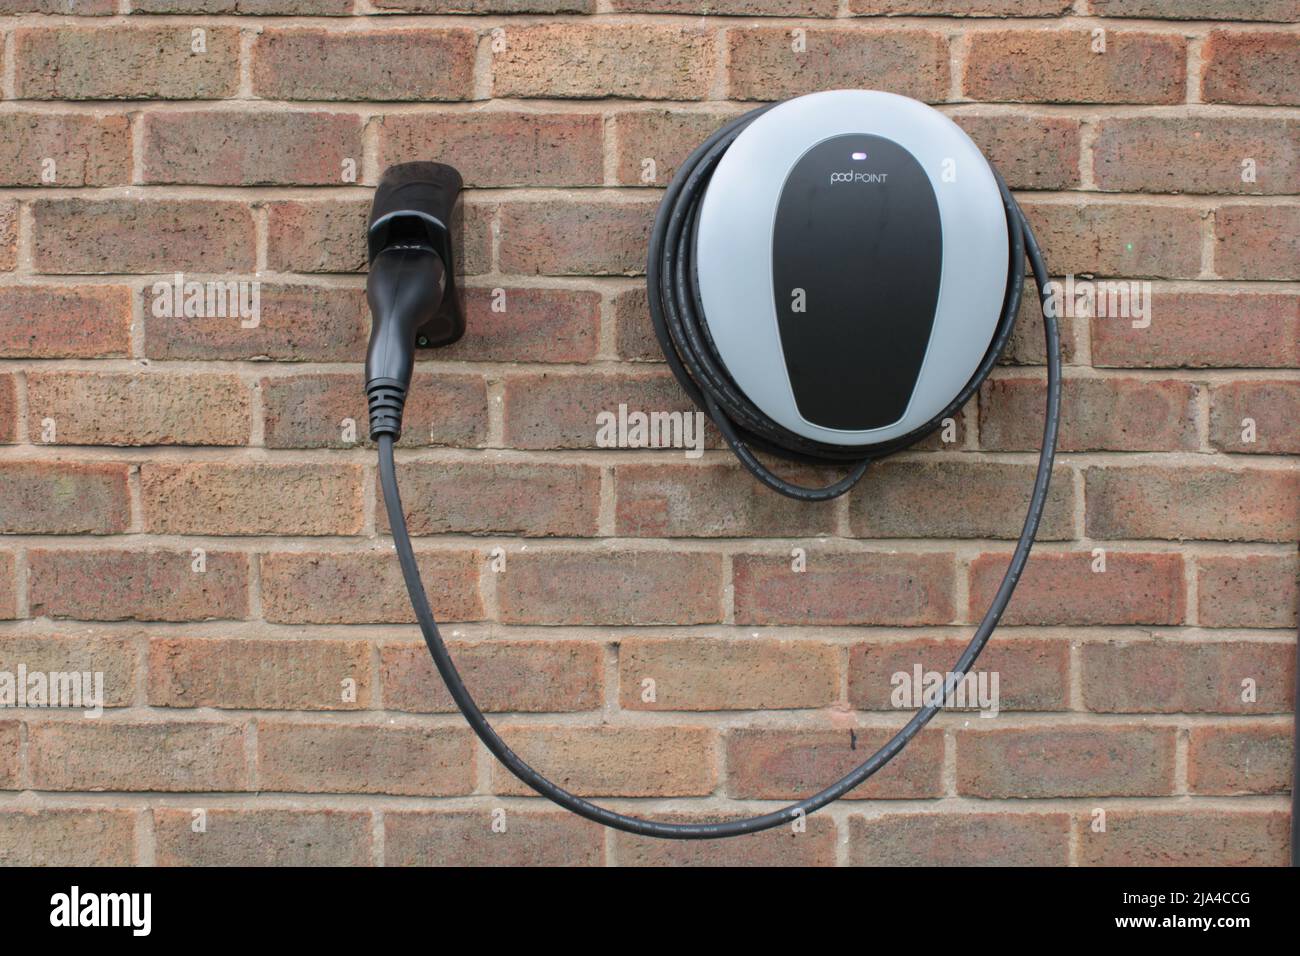 Home charging point. Pod Point domestic electric vehicle charging point mounted on a brick wall. Lancashire, UK Stock Photo